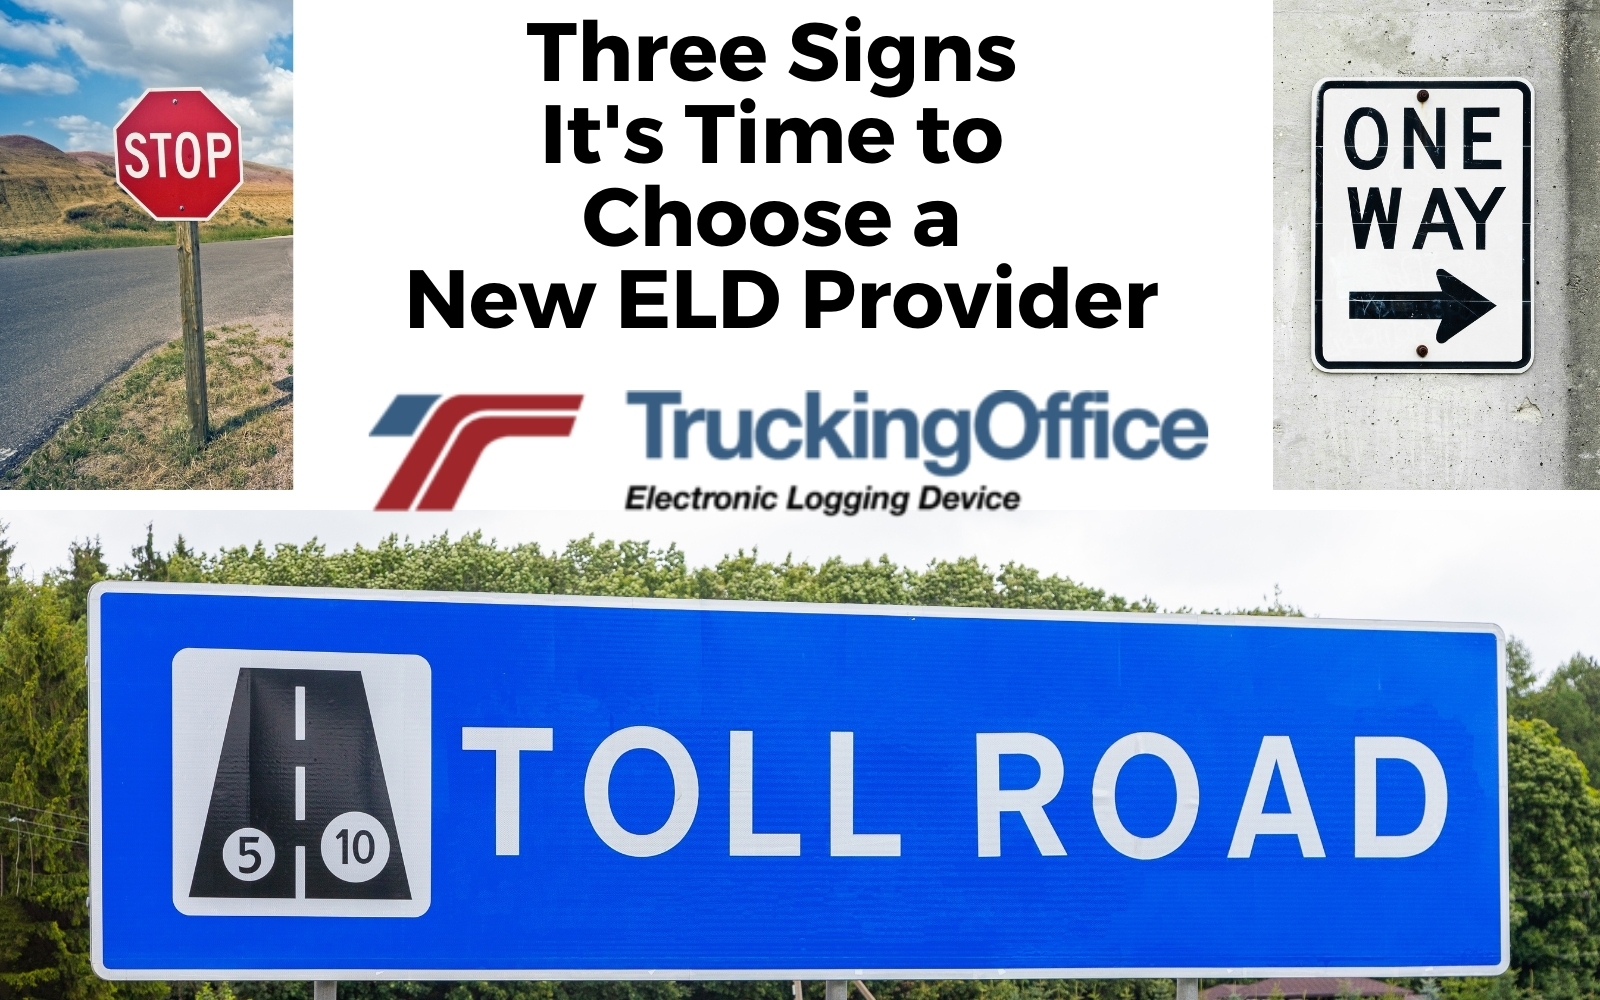 Three Signs It’s Time to Choose a New ELD Provider